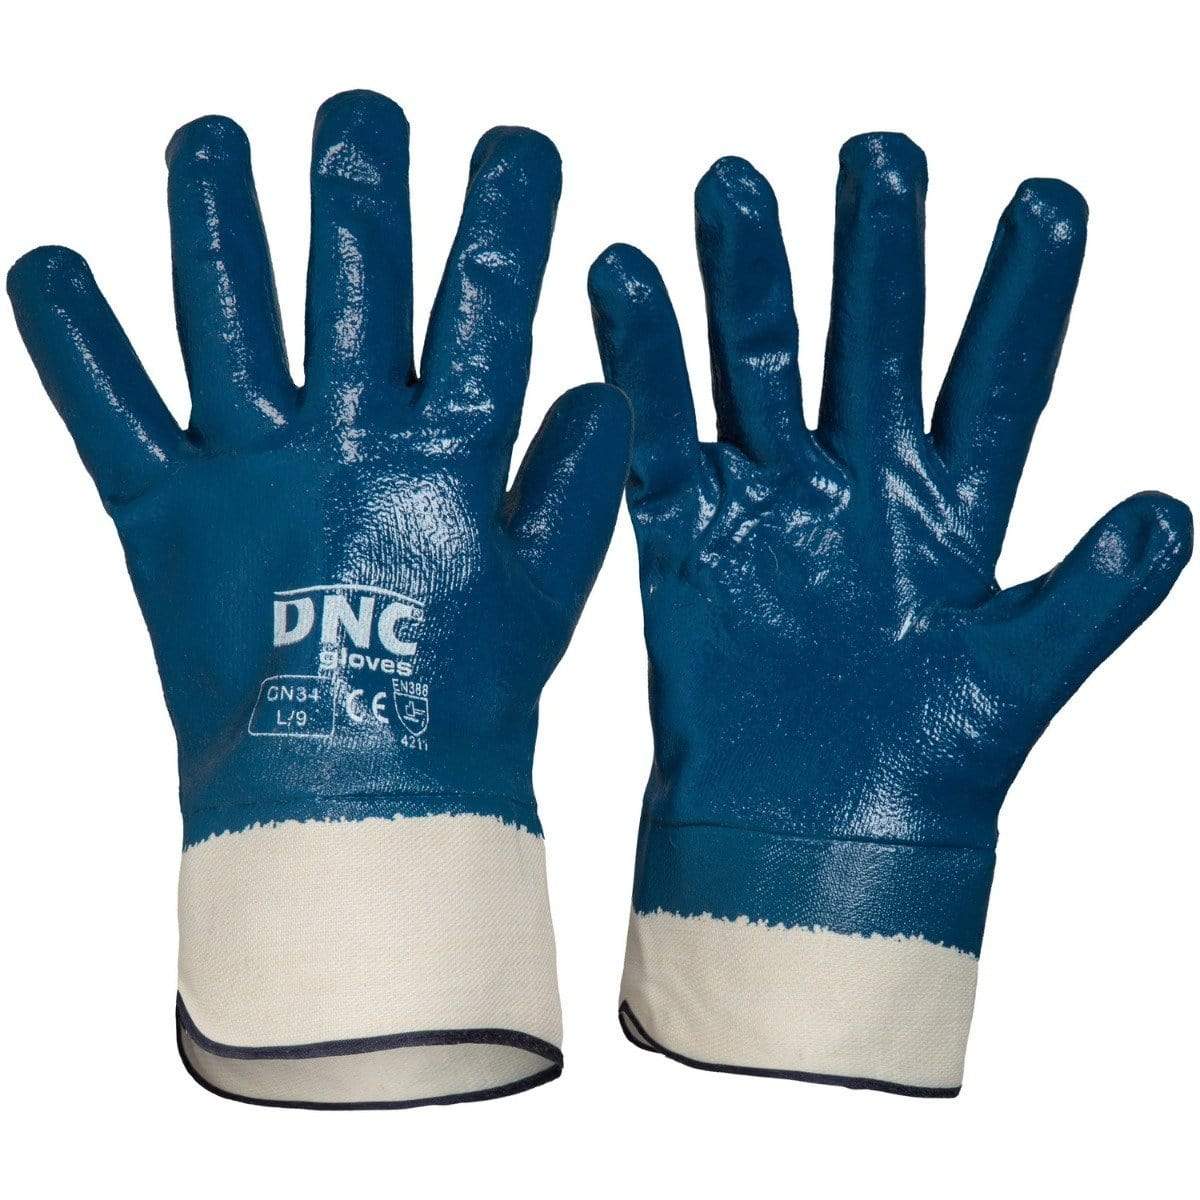 Dnc Workwear Blue Nitrile Full Dip With Canvas Cuff  X12 - GN34 PPE DNC Workwear Blue/Nature M/8 